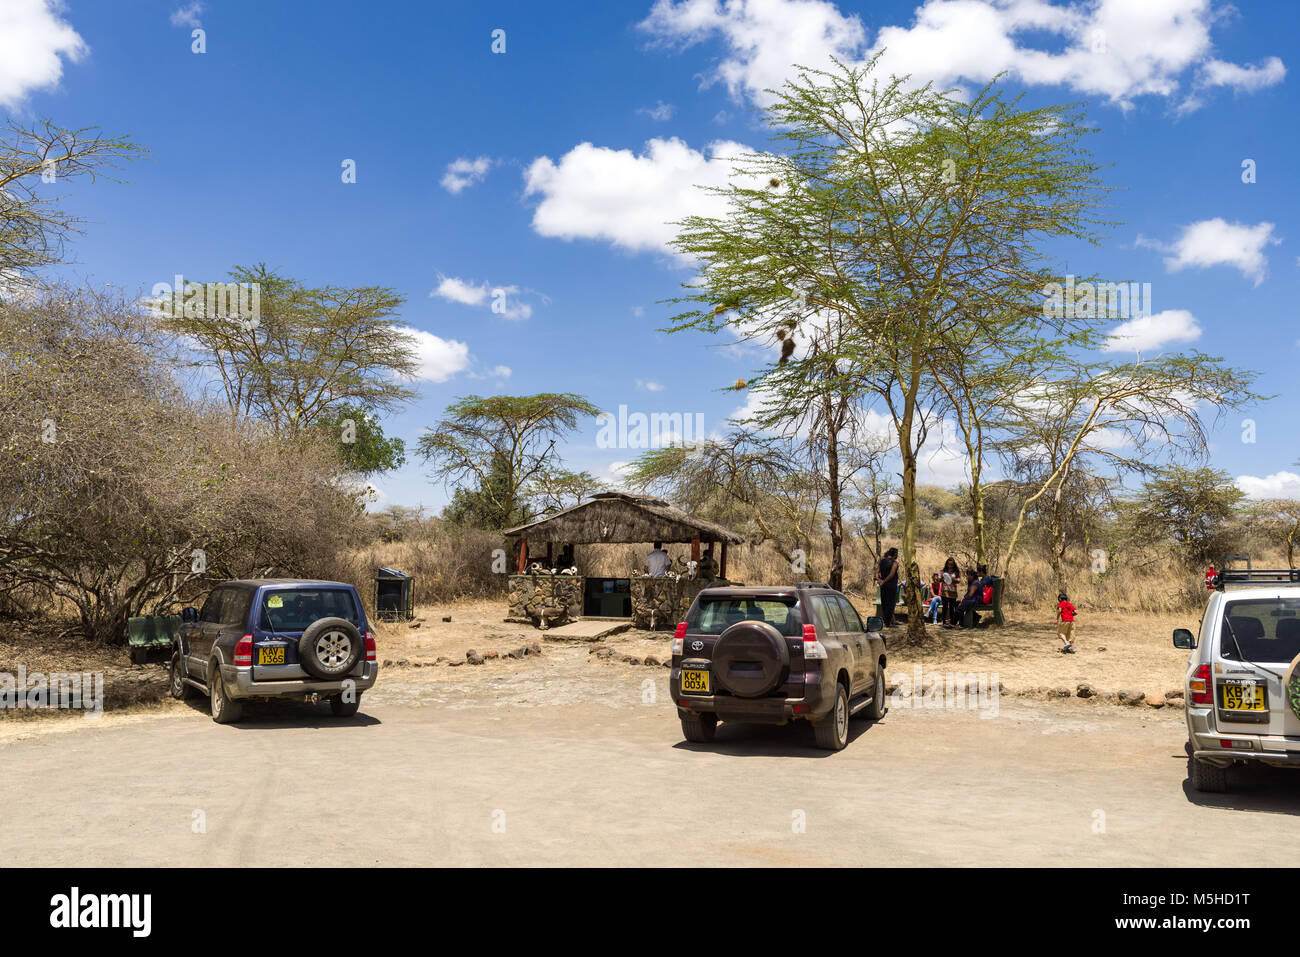 Vehicles parked at the Hippo pools car park in Nairobi National Park with people in the shade of trees, Kenya Stock Photo